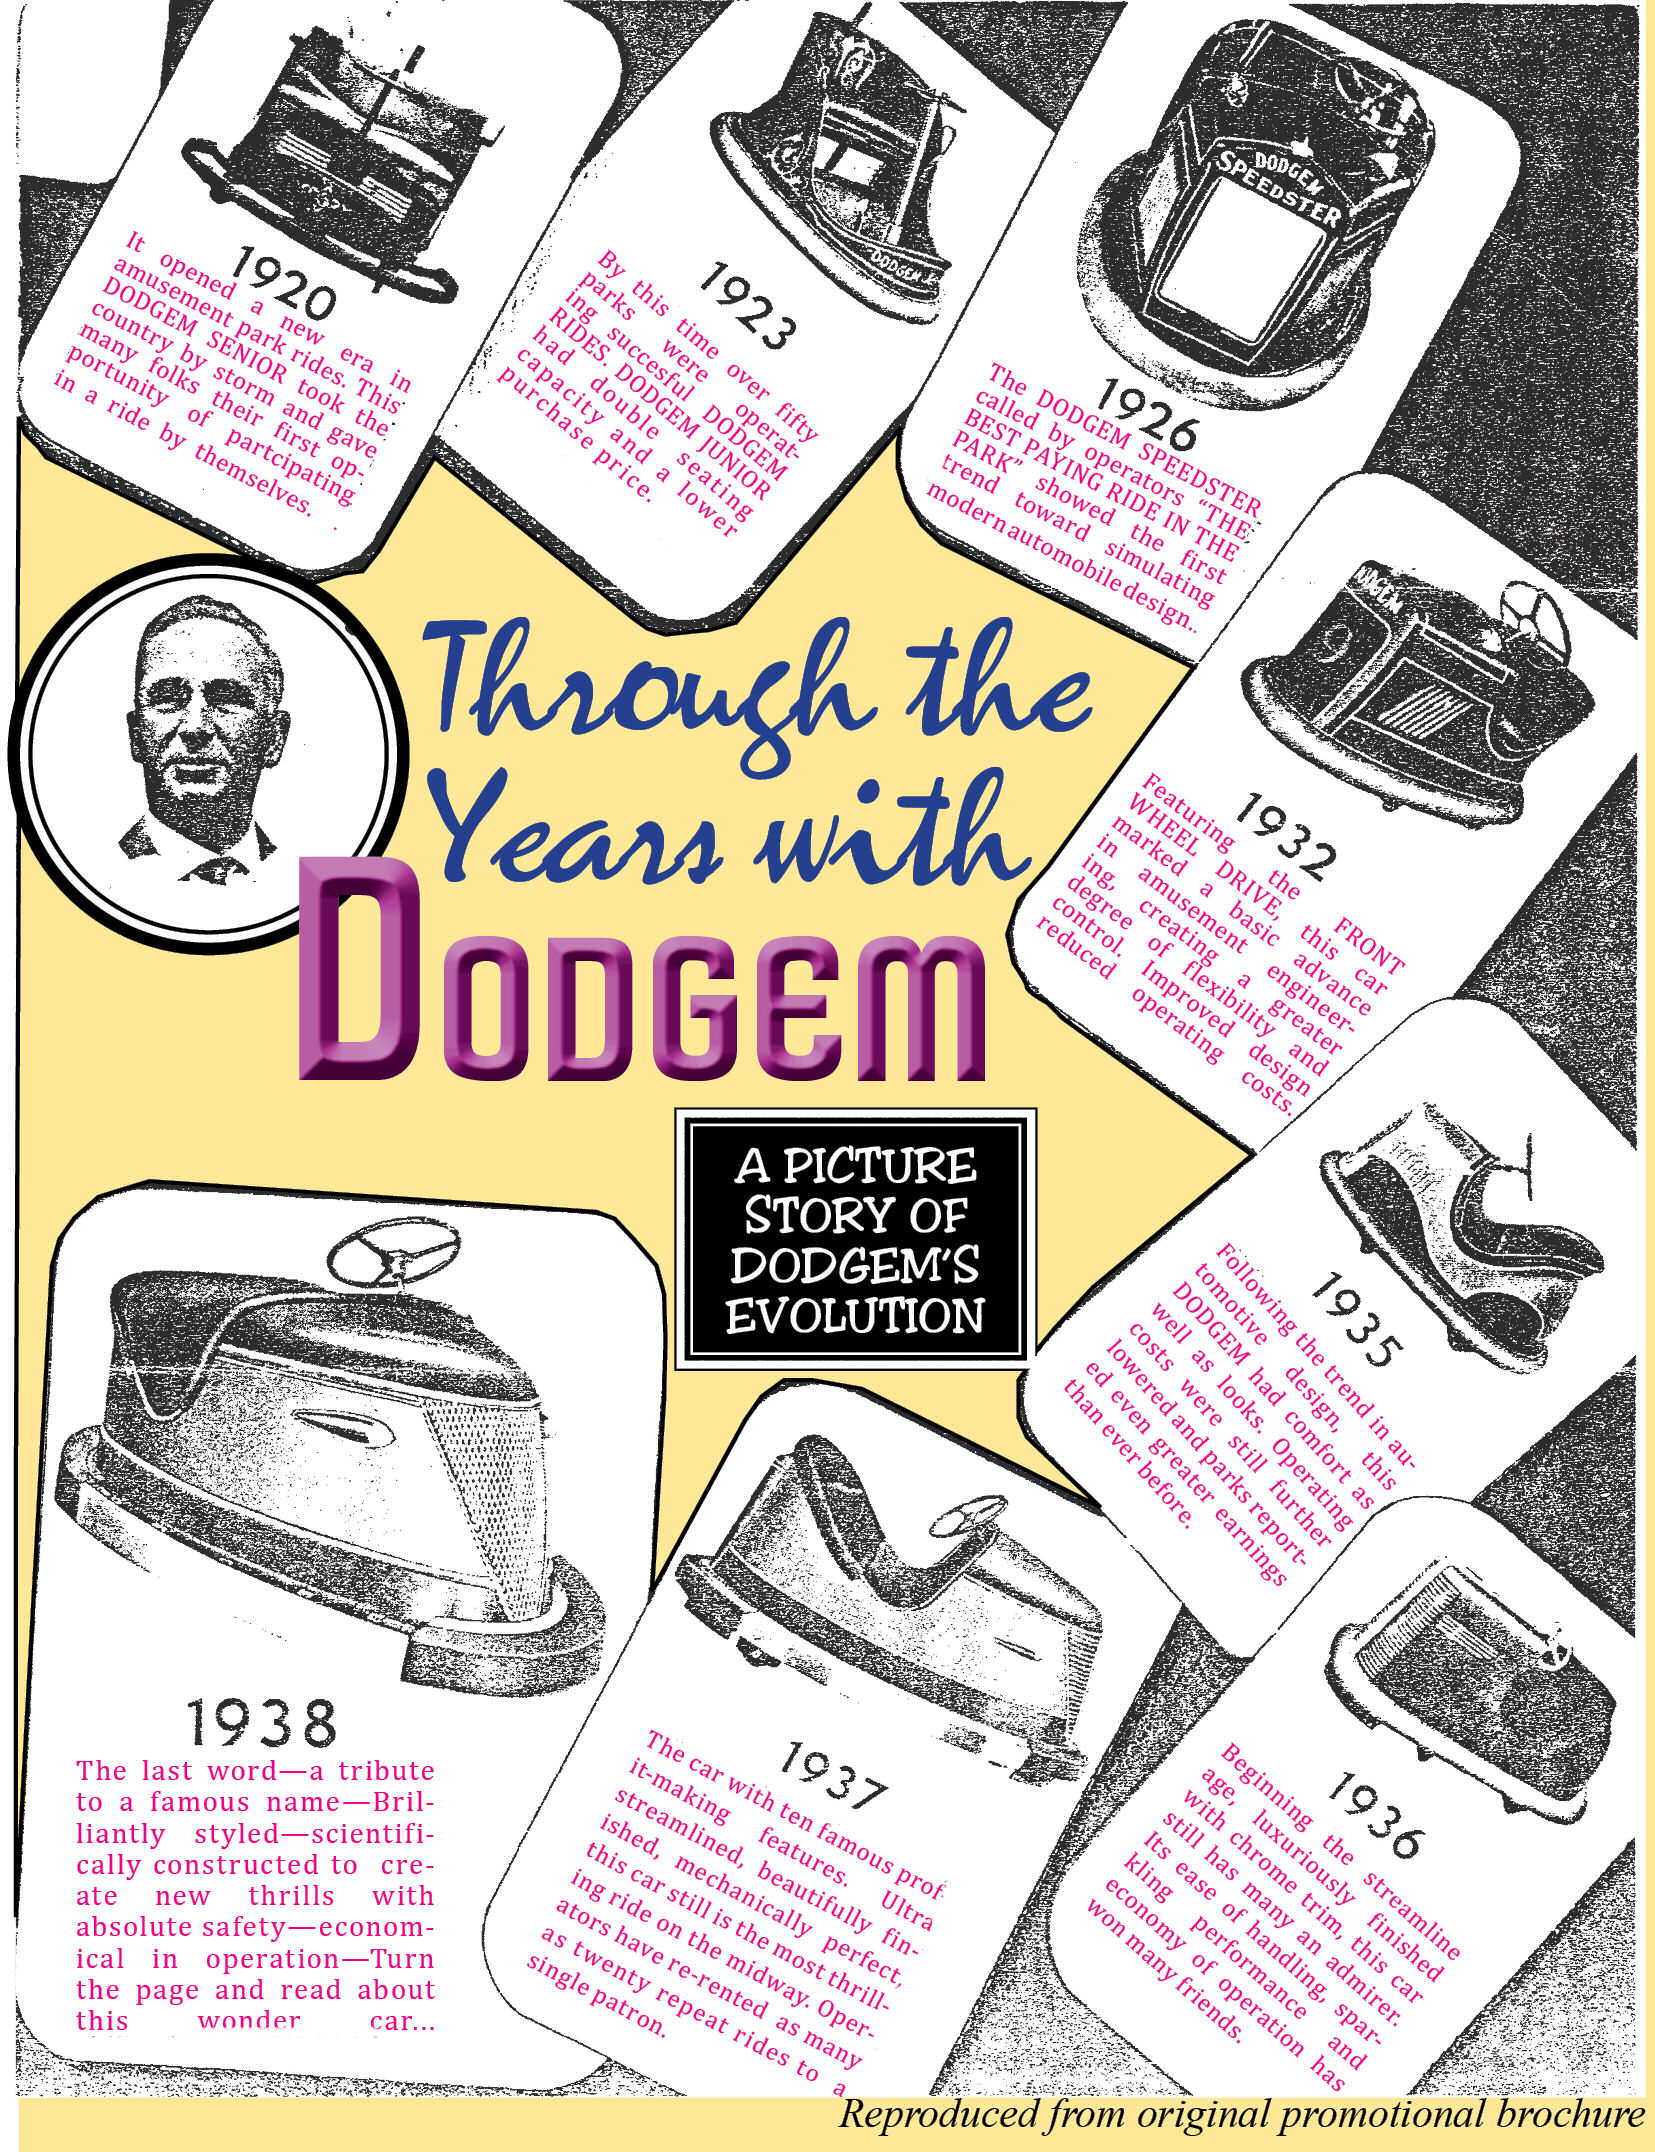 Through the years with Dodgem